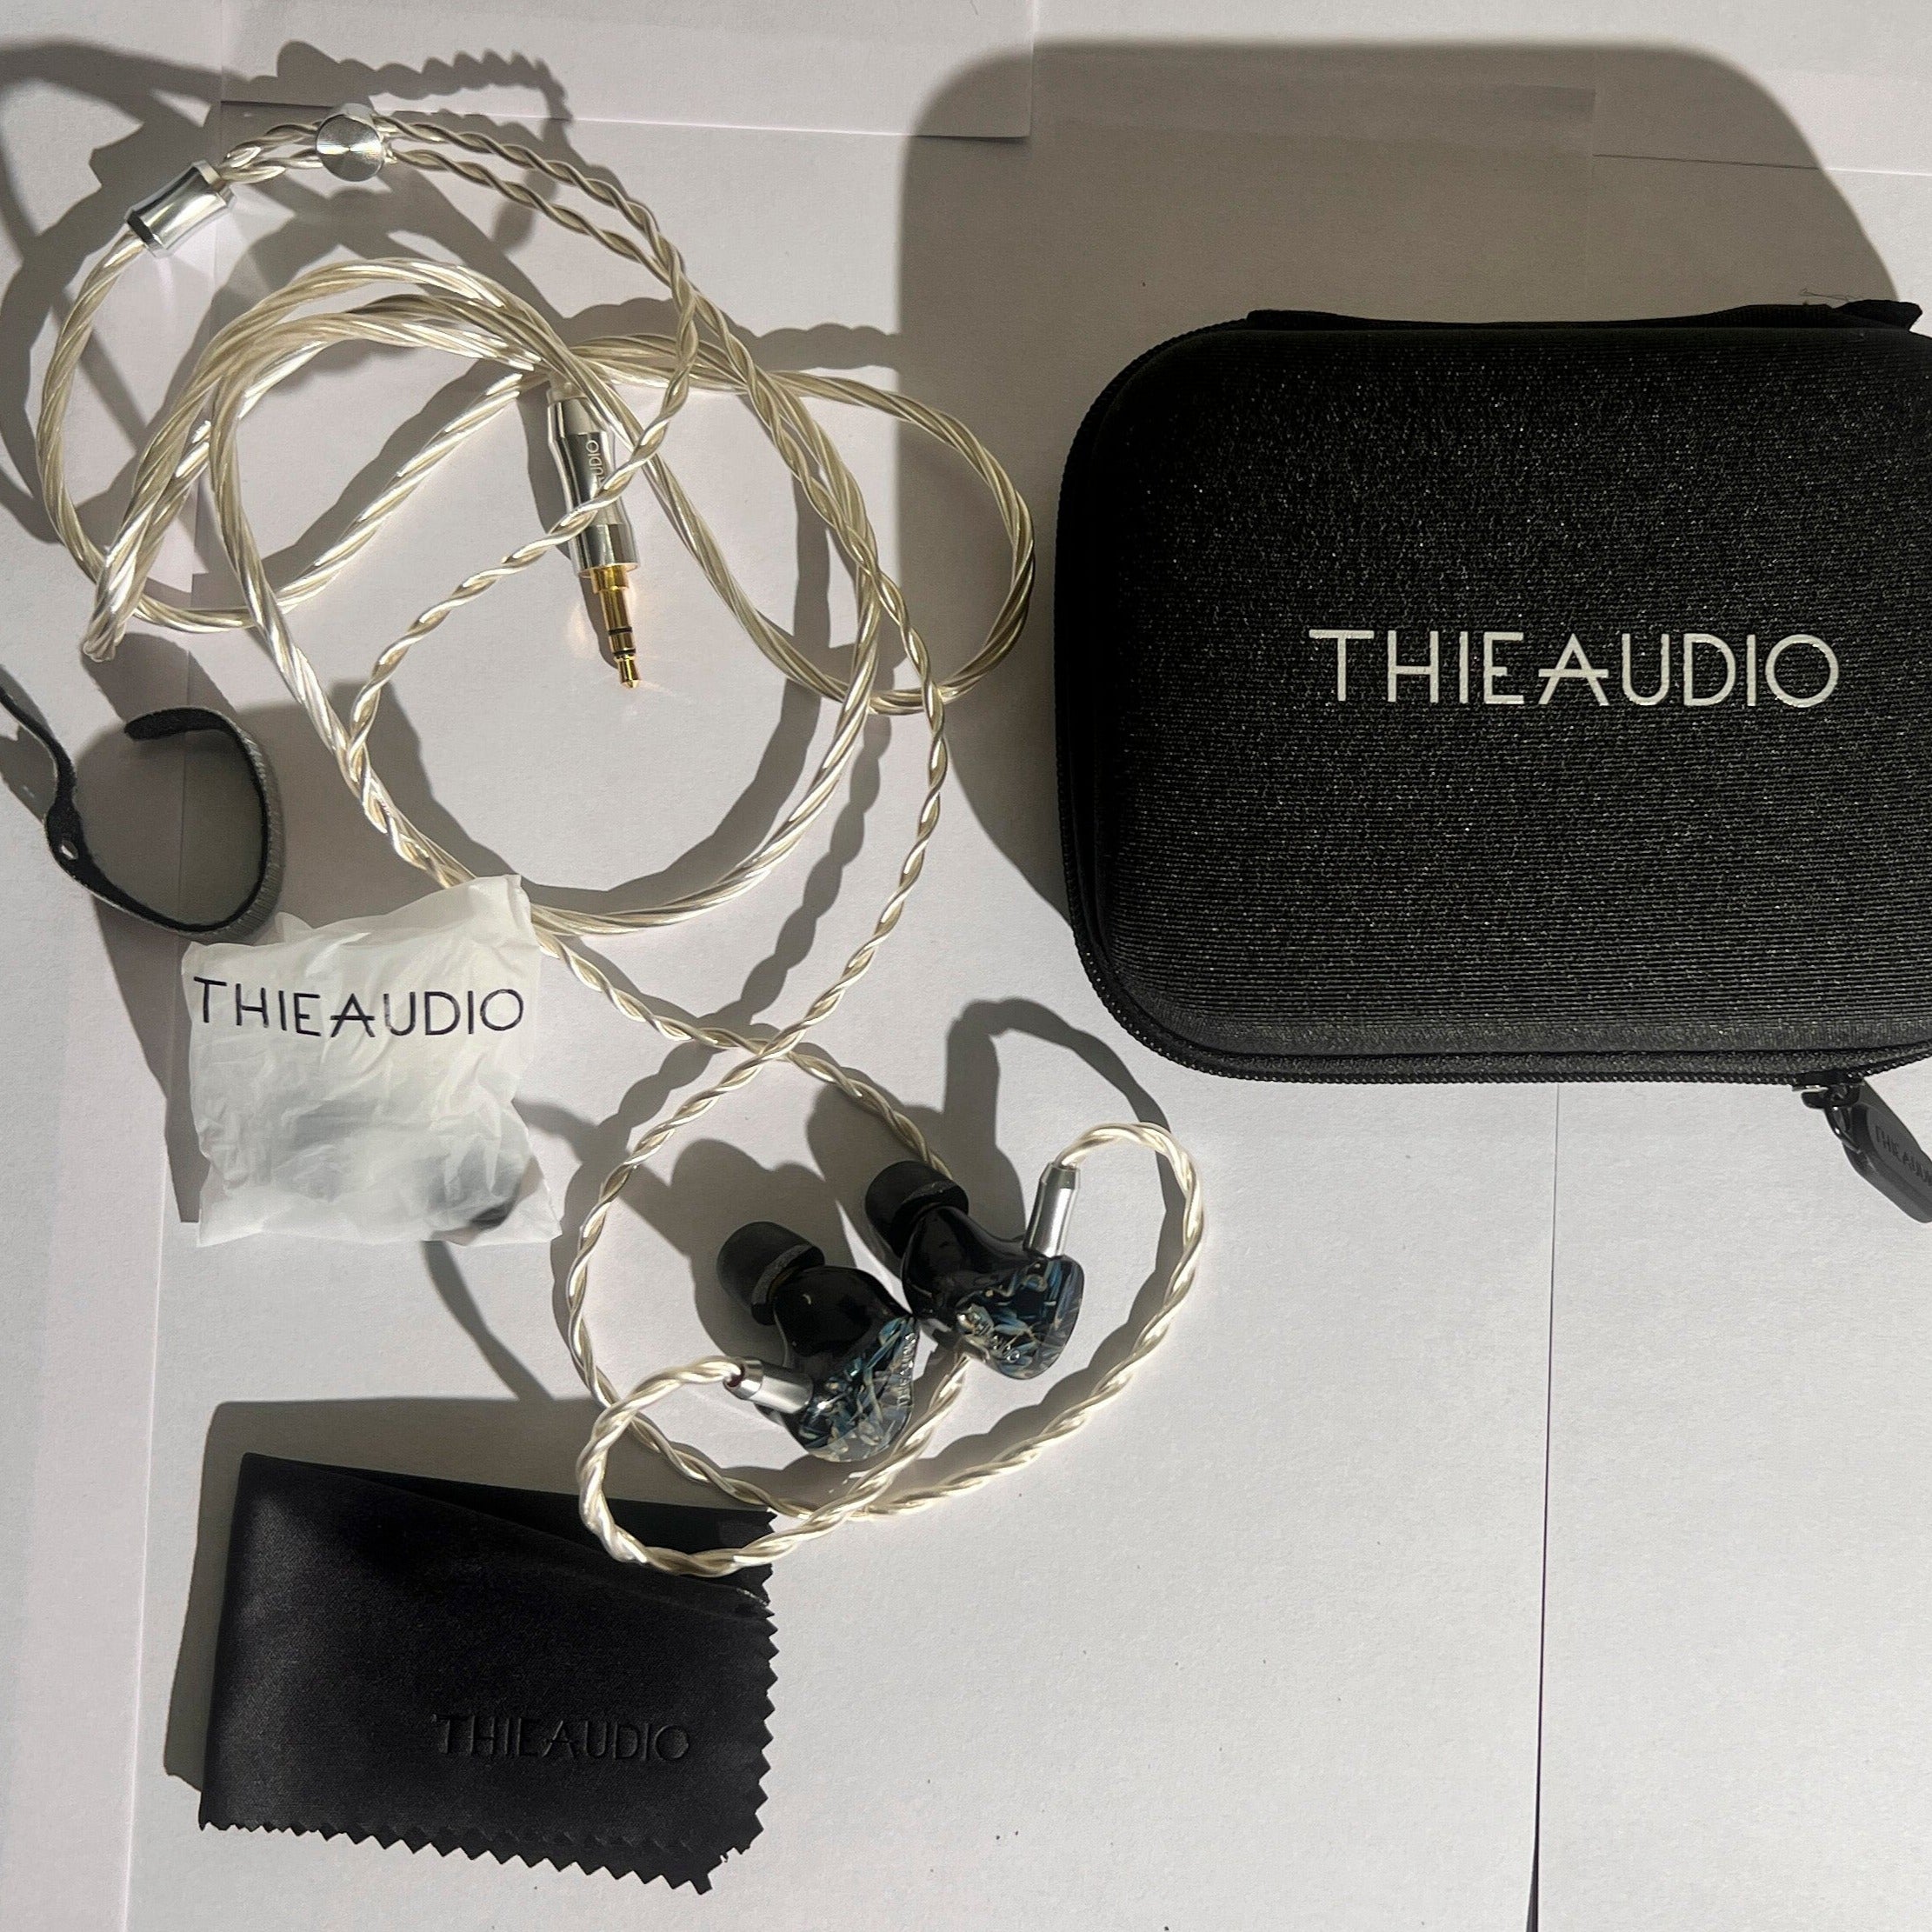 ThieAudio - Hype 2 (Pre-Owned)